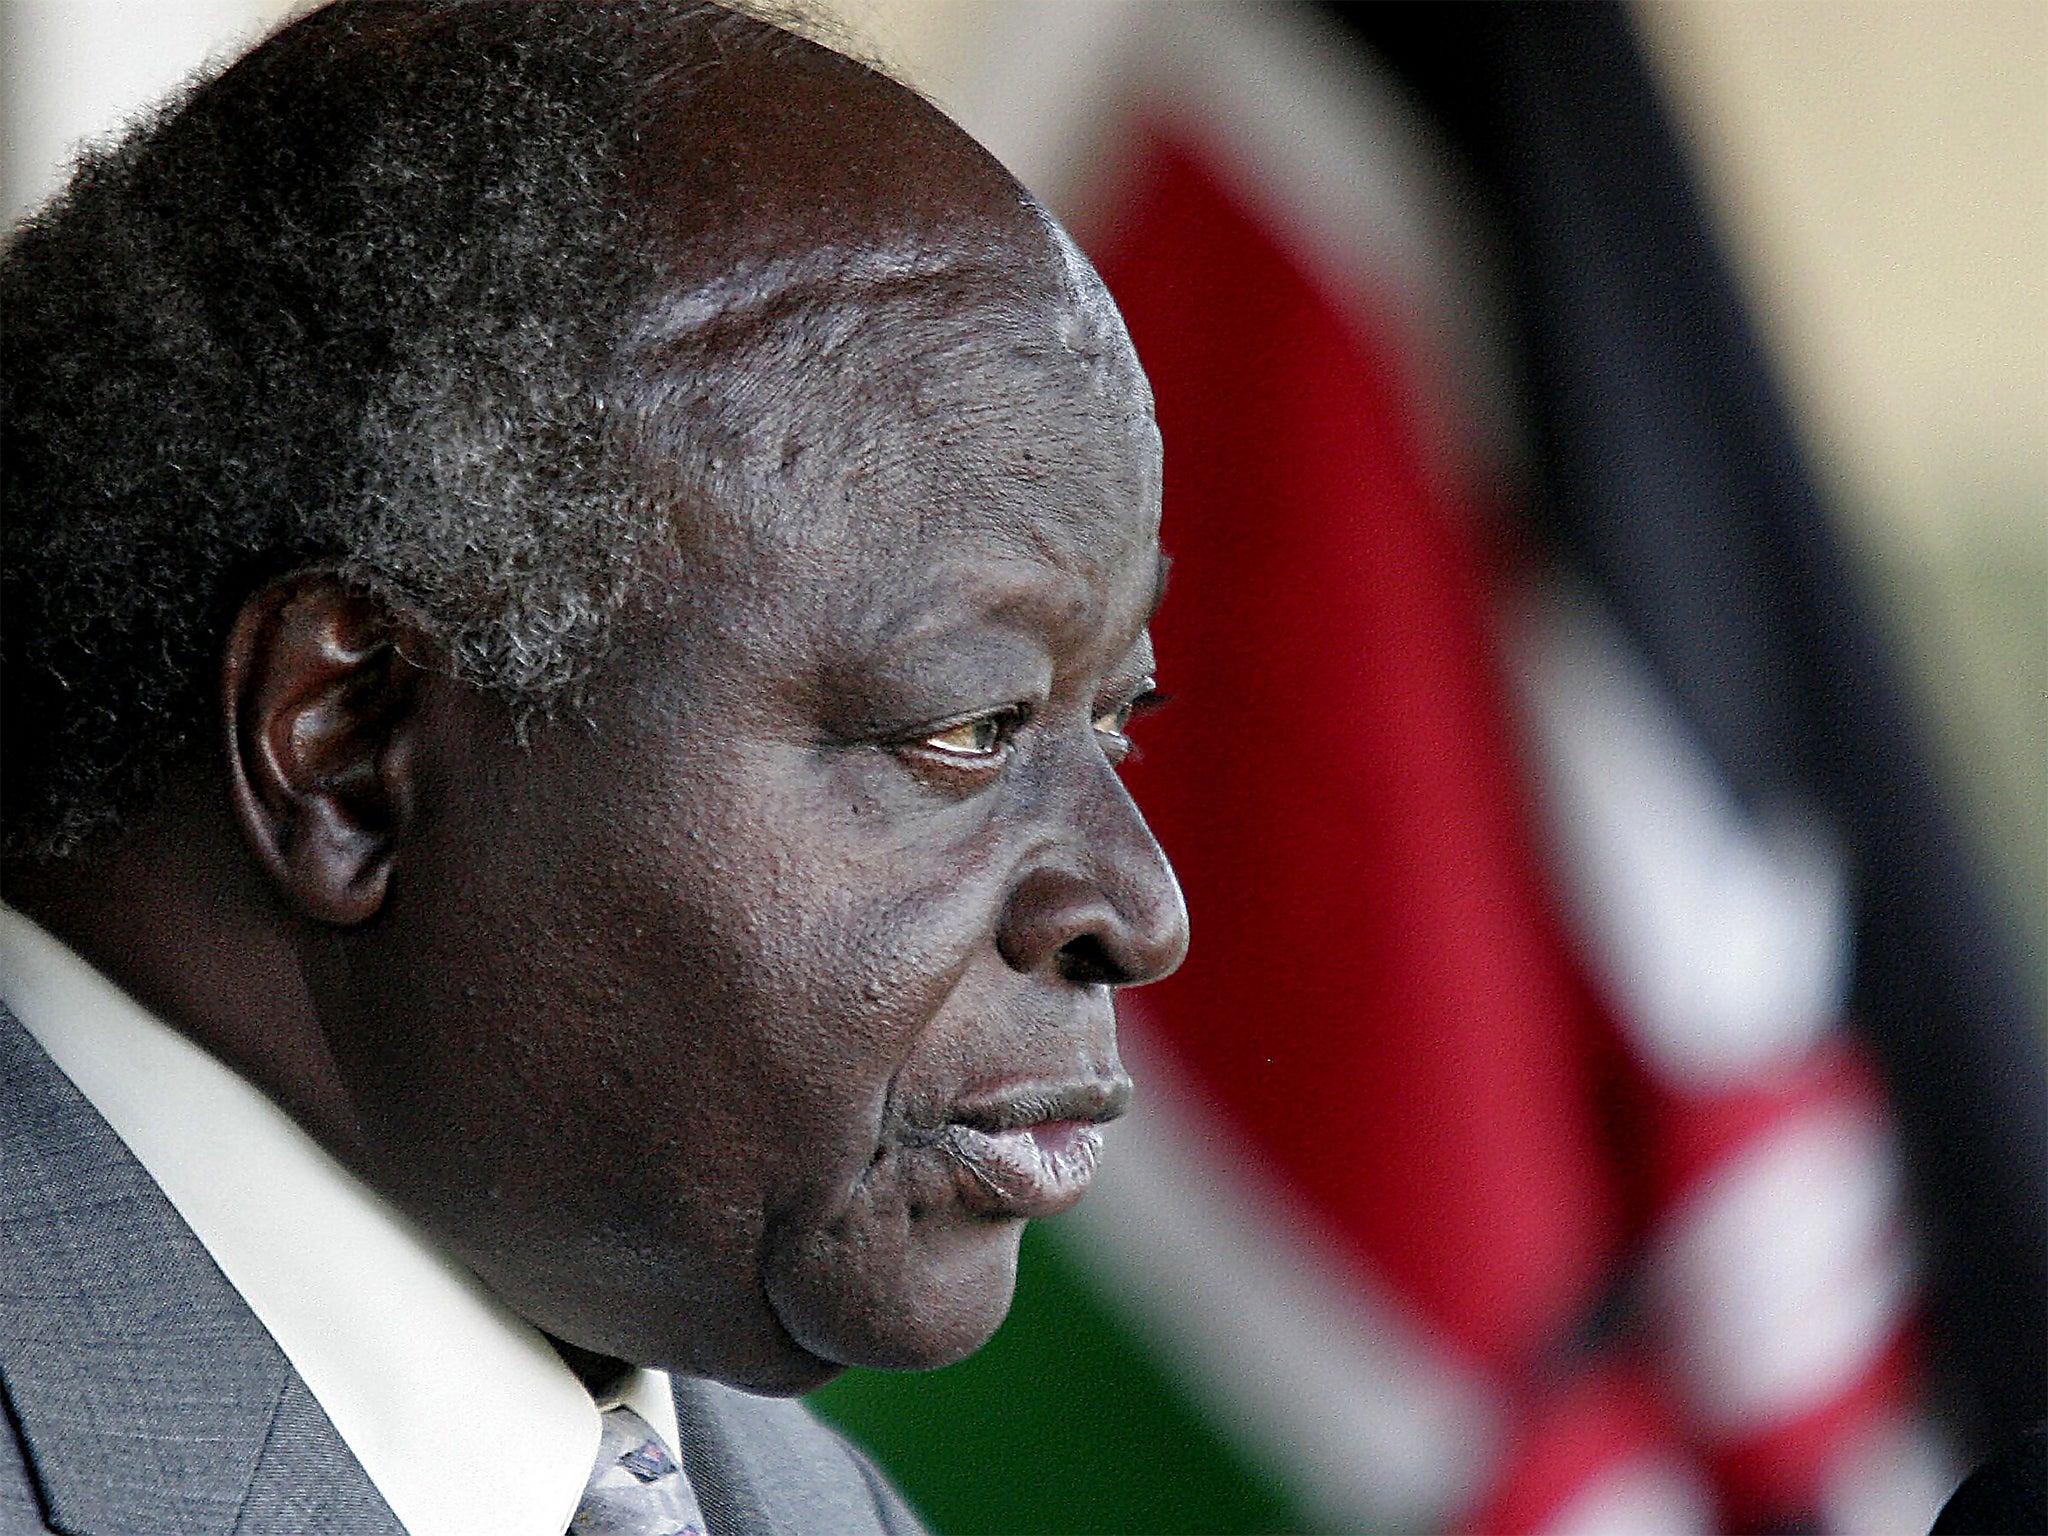 Kibaki was the last leader who was part of the generation that led the country from British colonial rule to independence